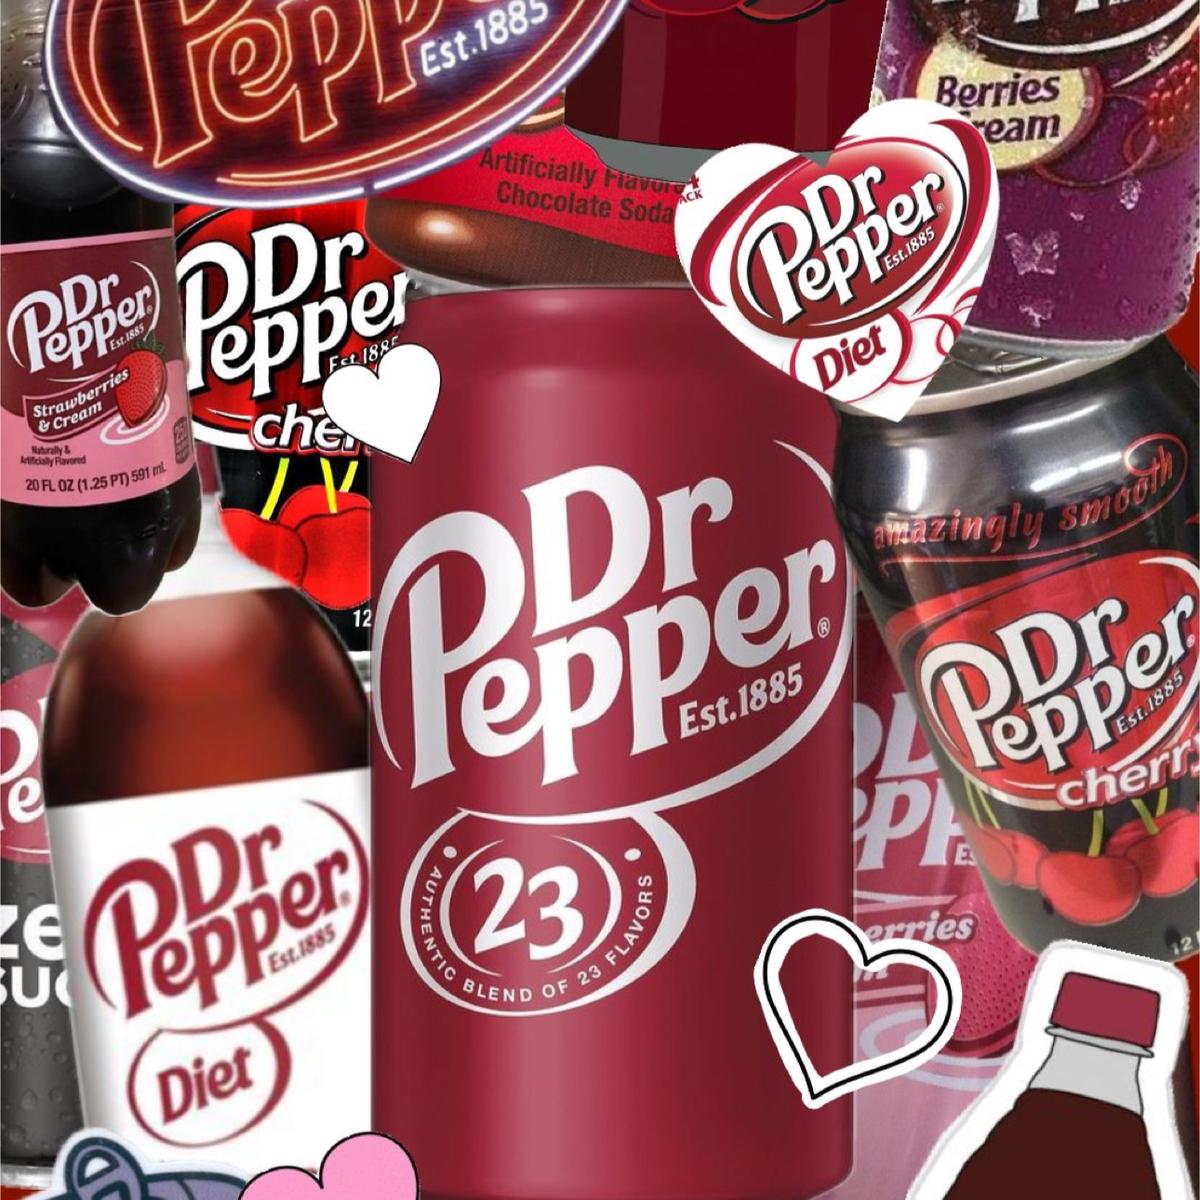 🎀DR PEPPERR❤️'s images